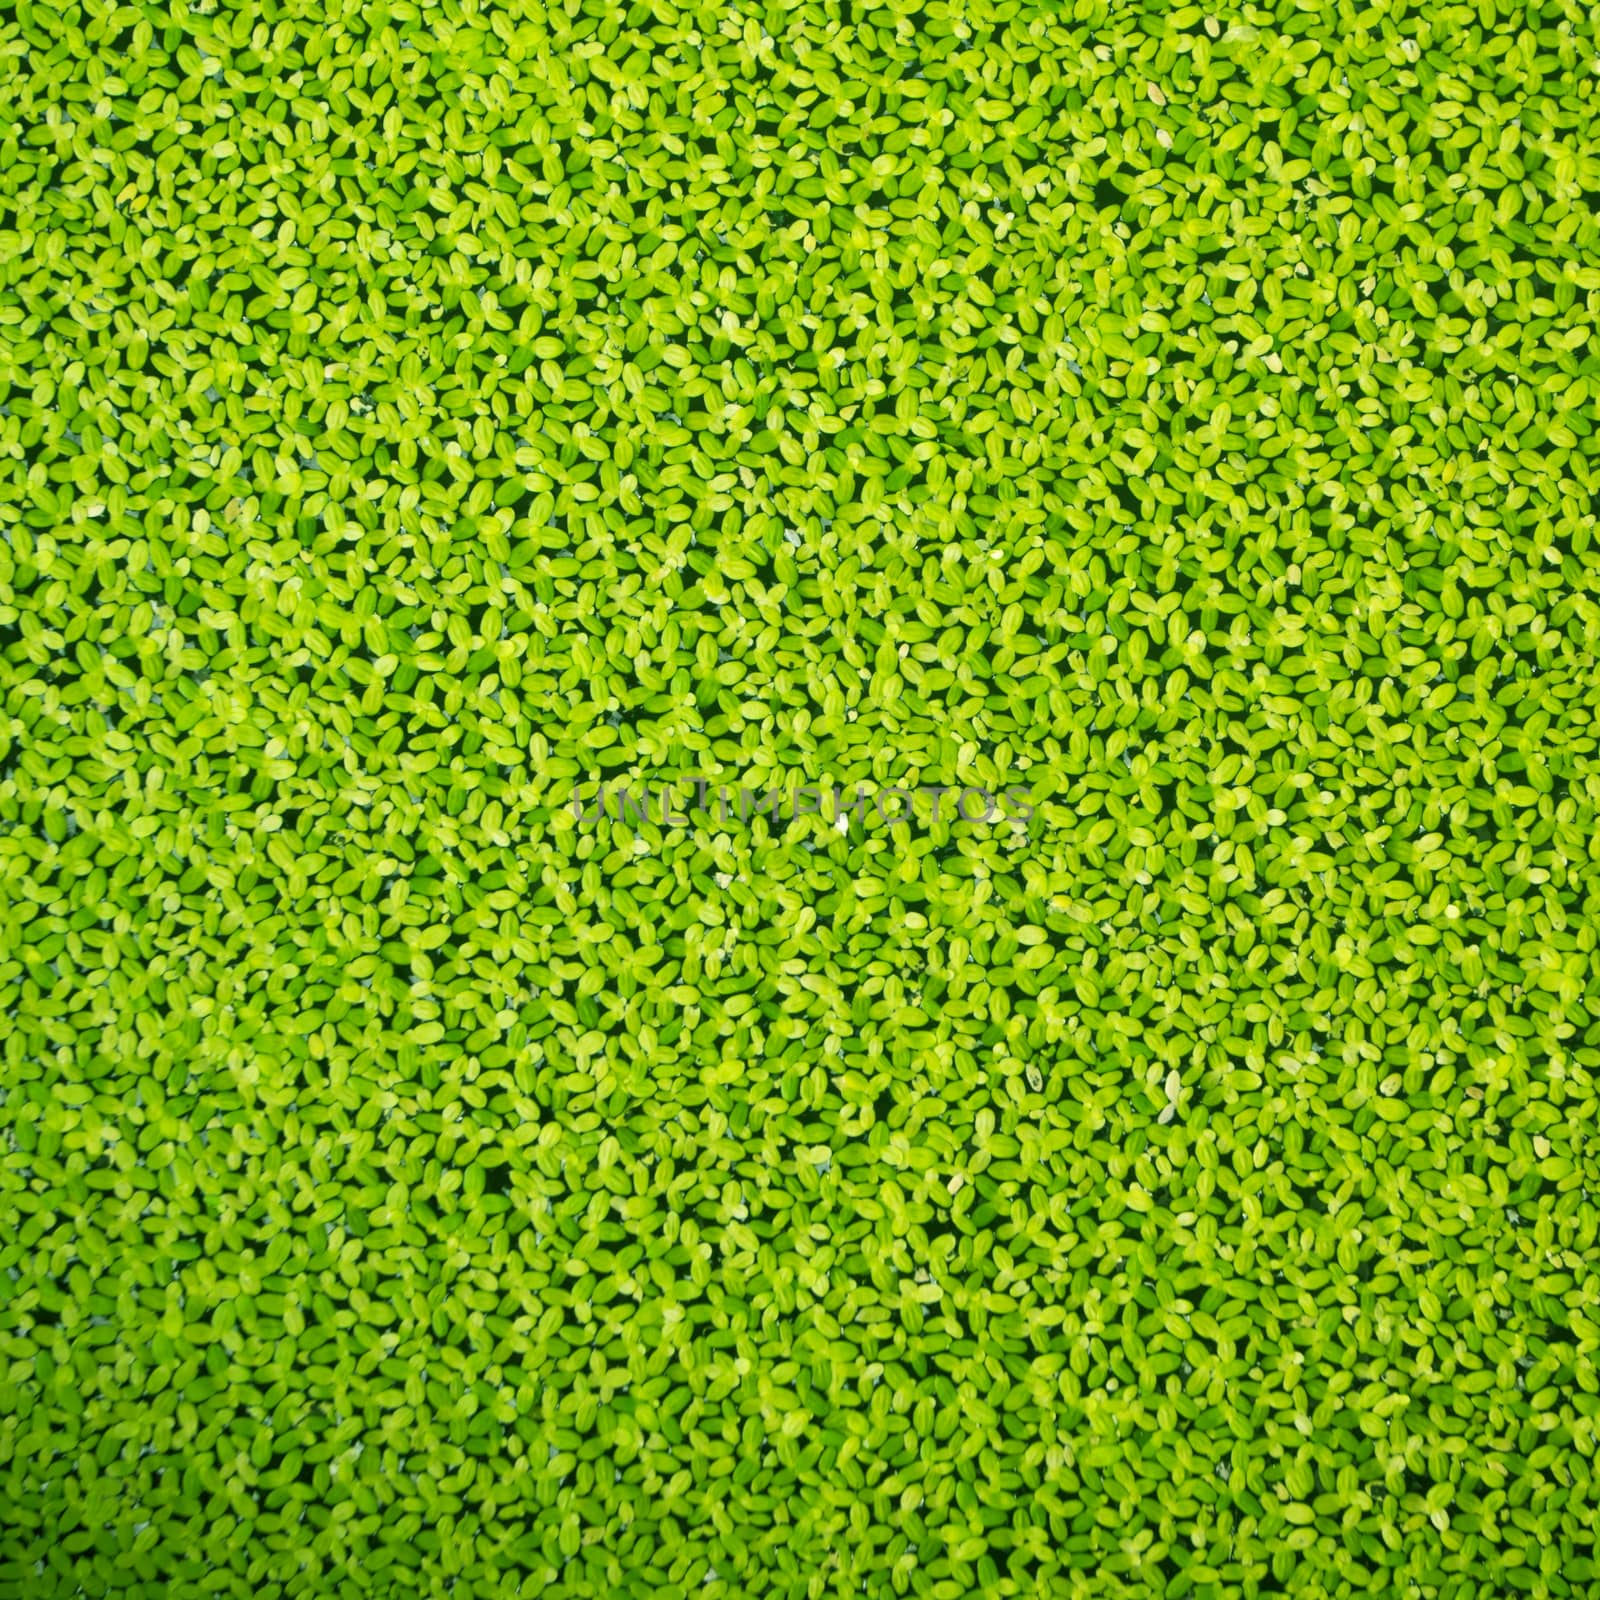 Duckweed covered on the water surface 